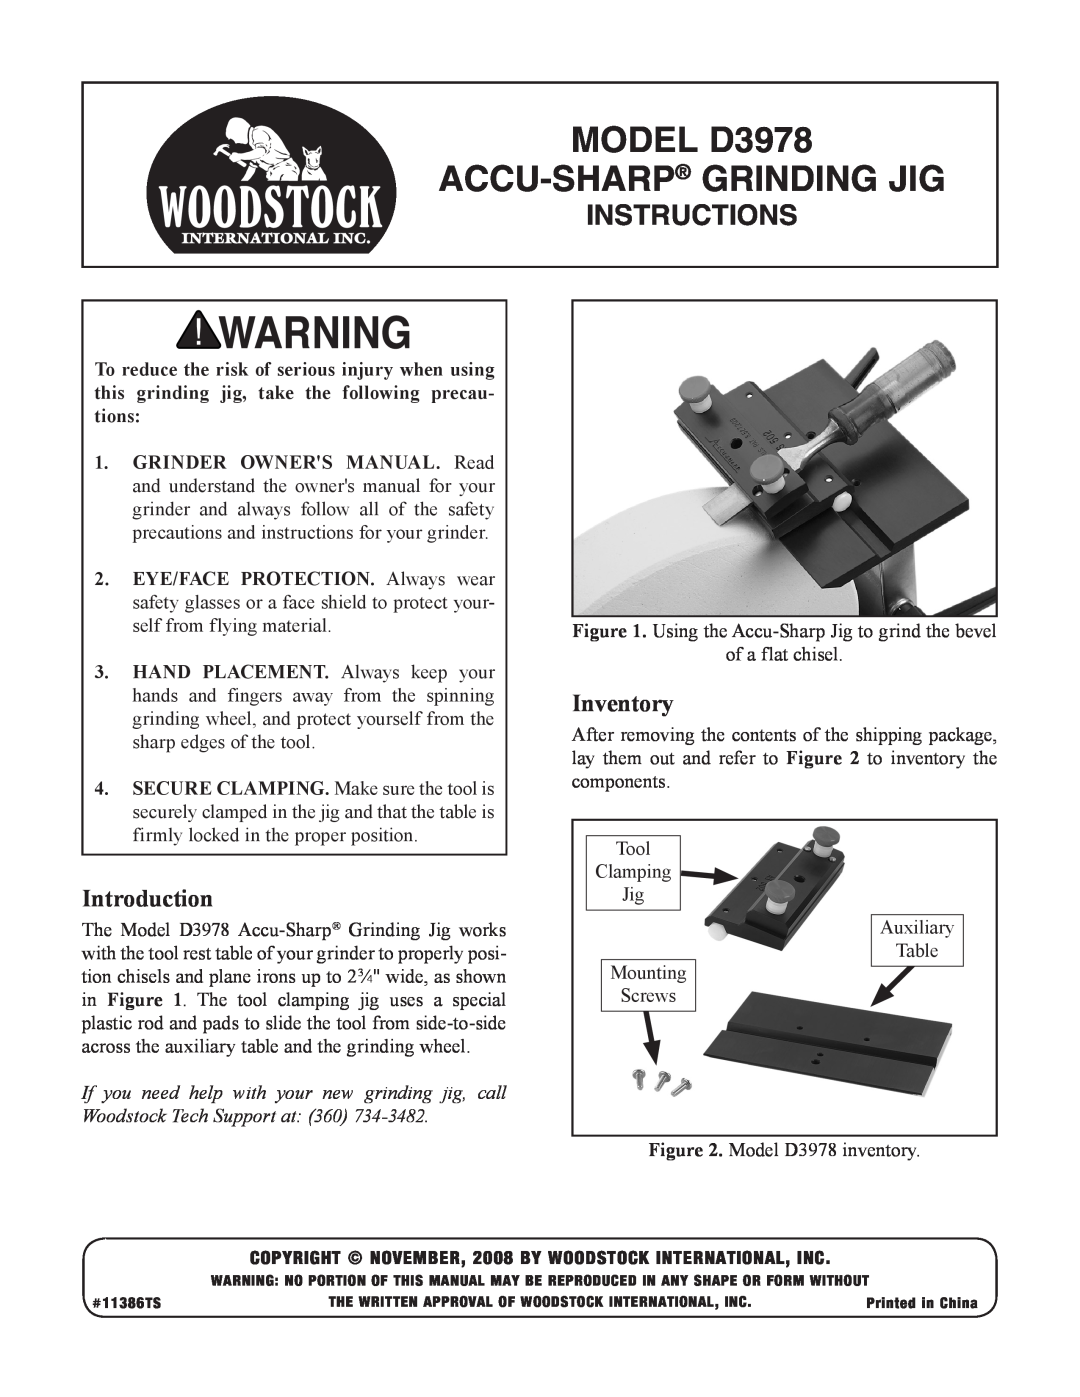 Woodstock owner manual Introduction, Inventory, MODEL D3978 ACCU-SHARP GRINDING JIG, Instructions 